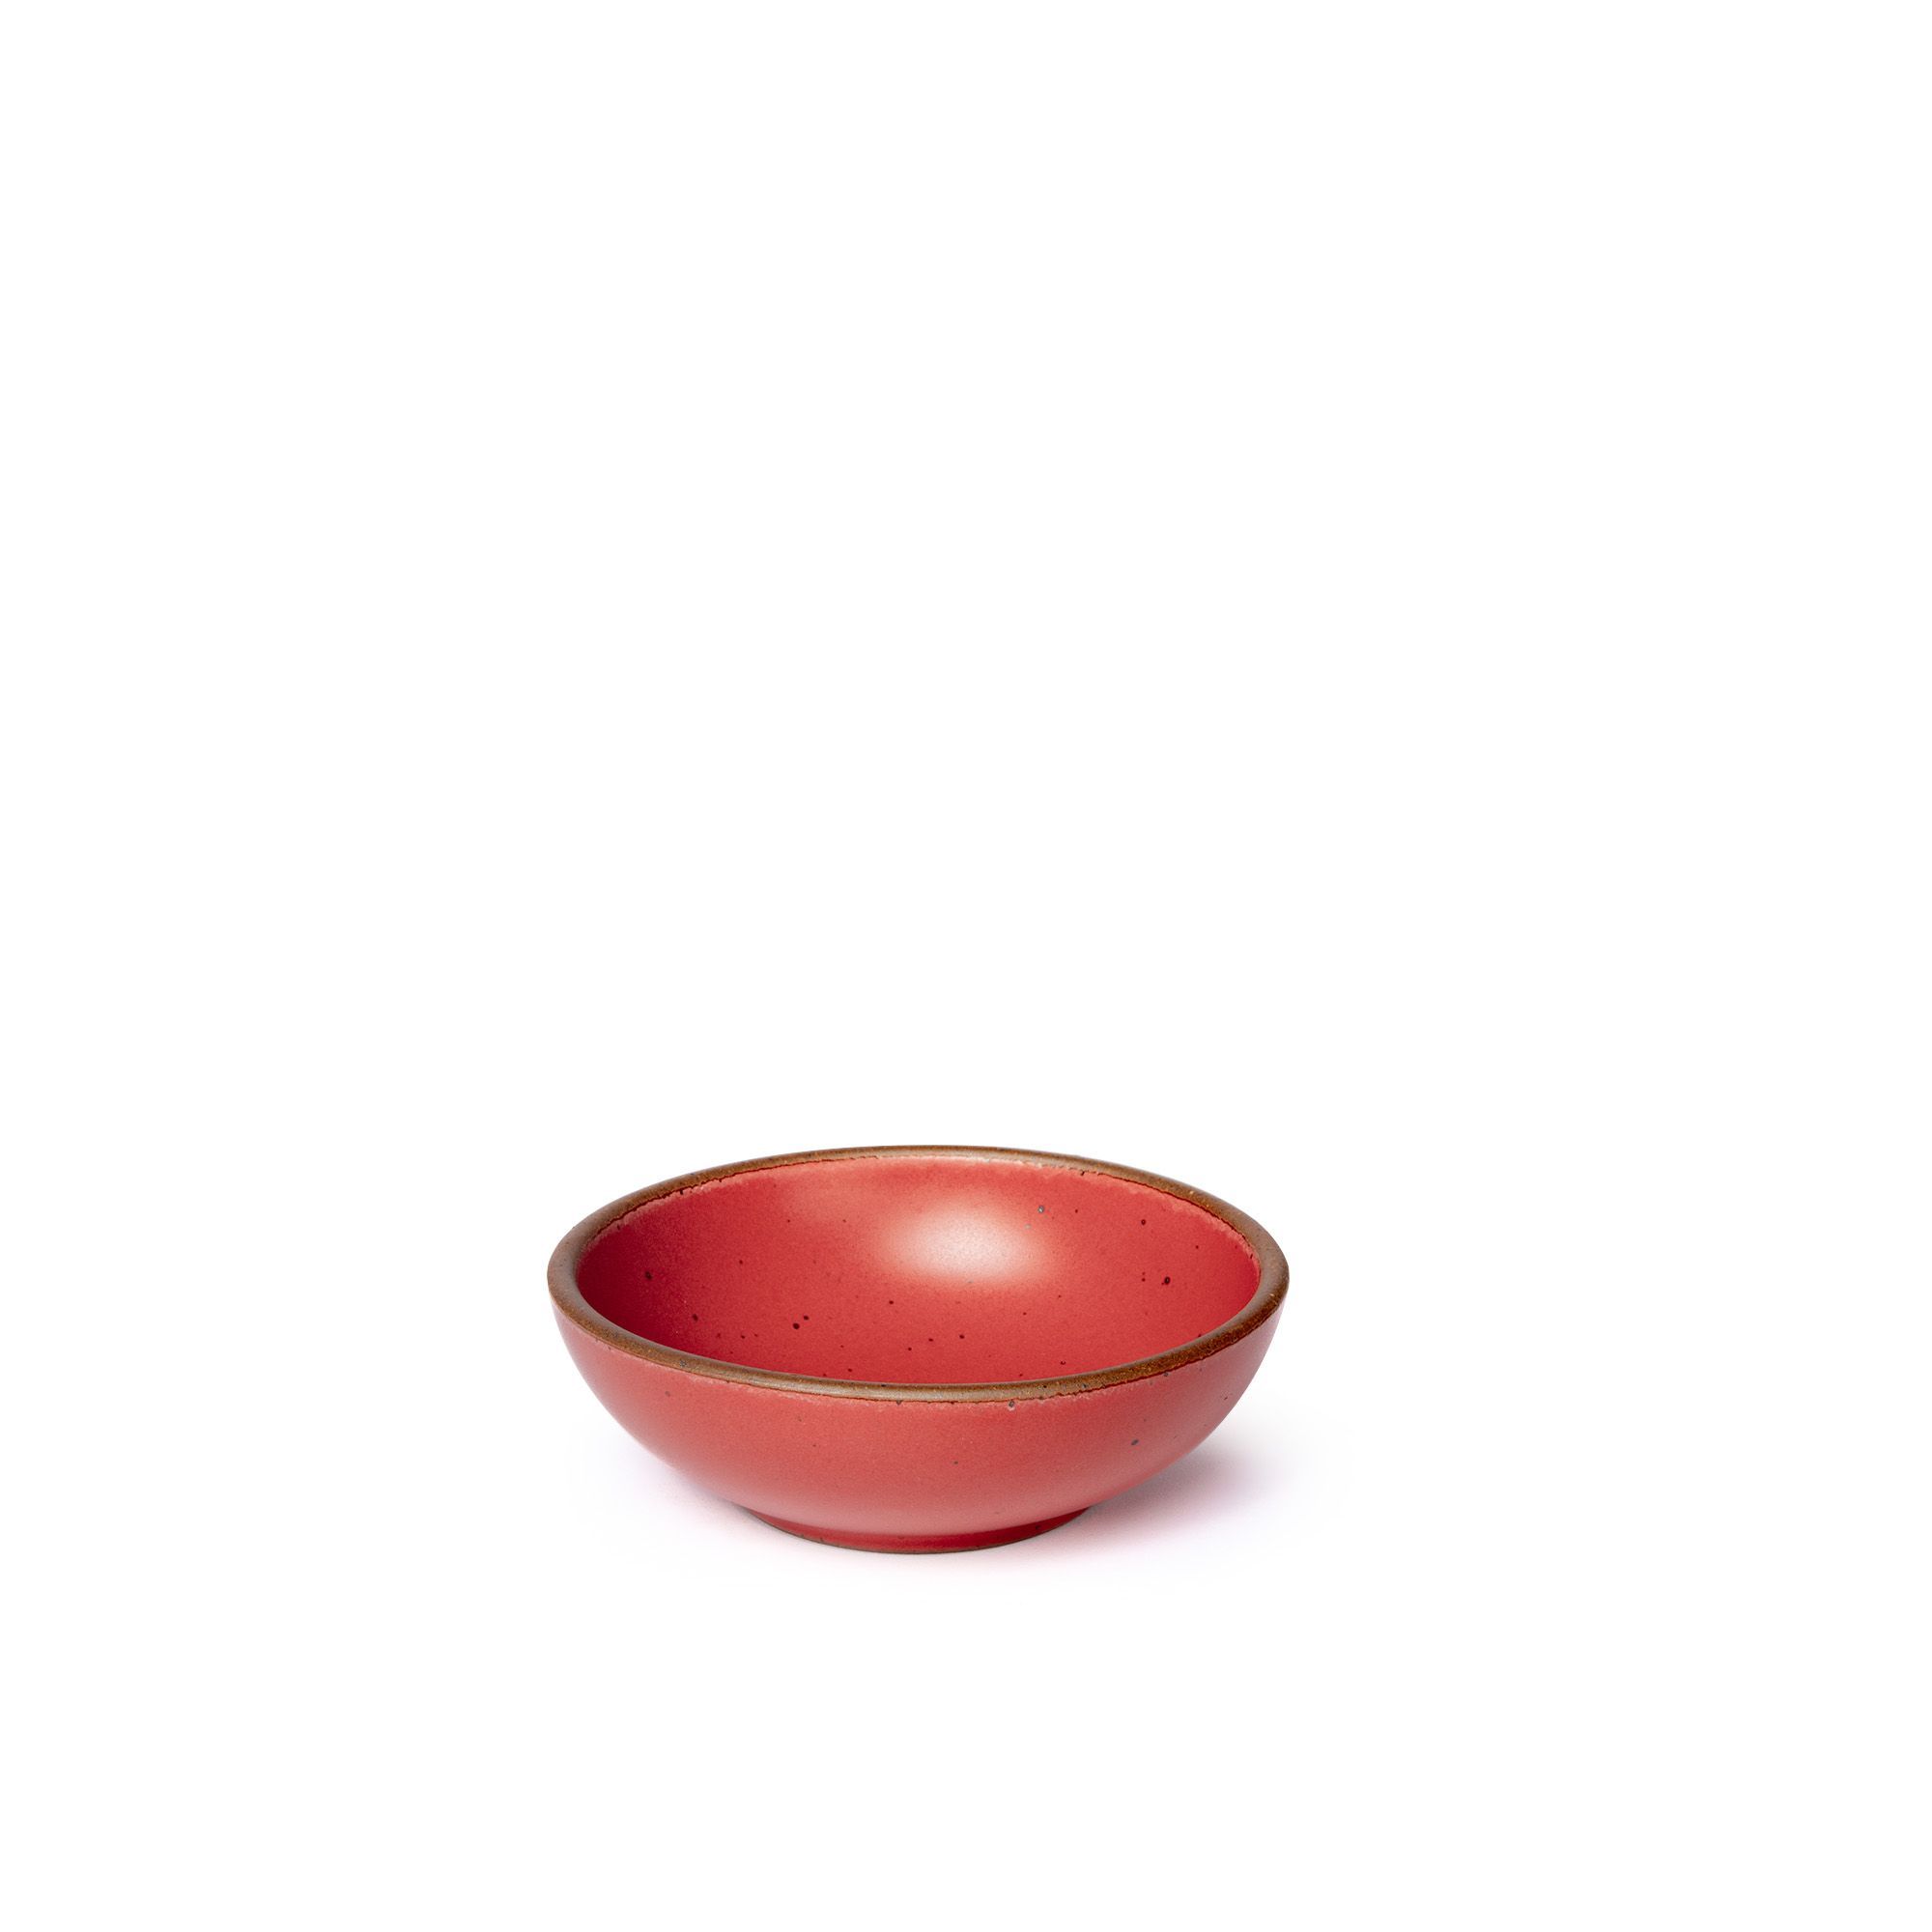 A small shallow ceramic bowl in a bold red color featuring iron speckles and an unglazed rimA small shallow ceramic bowl in a bold red color featuring iron speckles and an unglazed rim